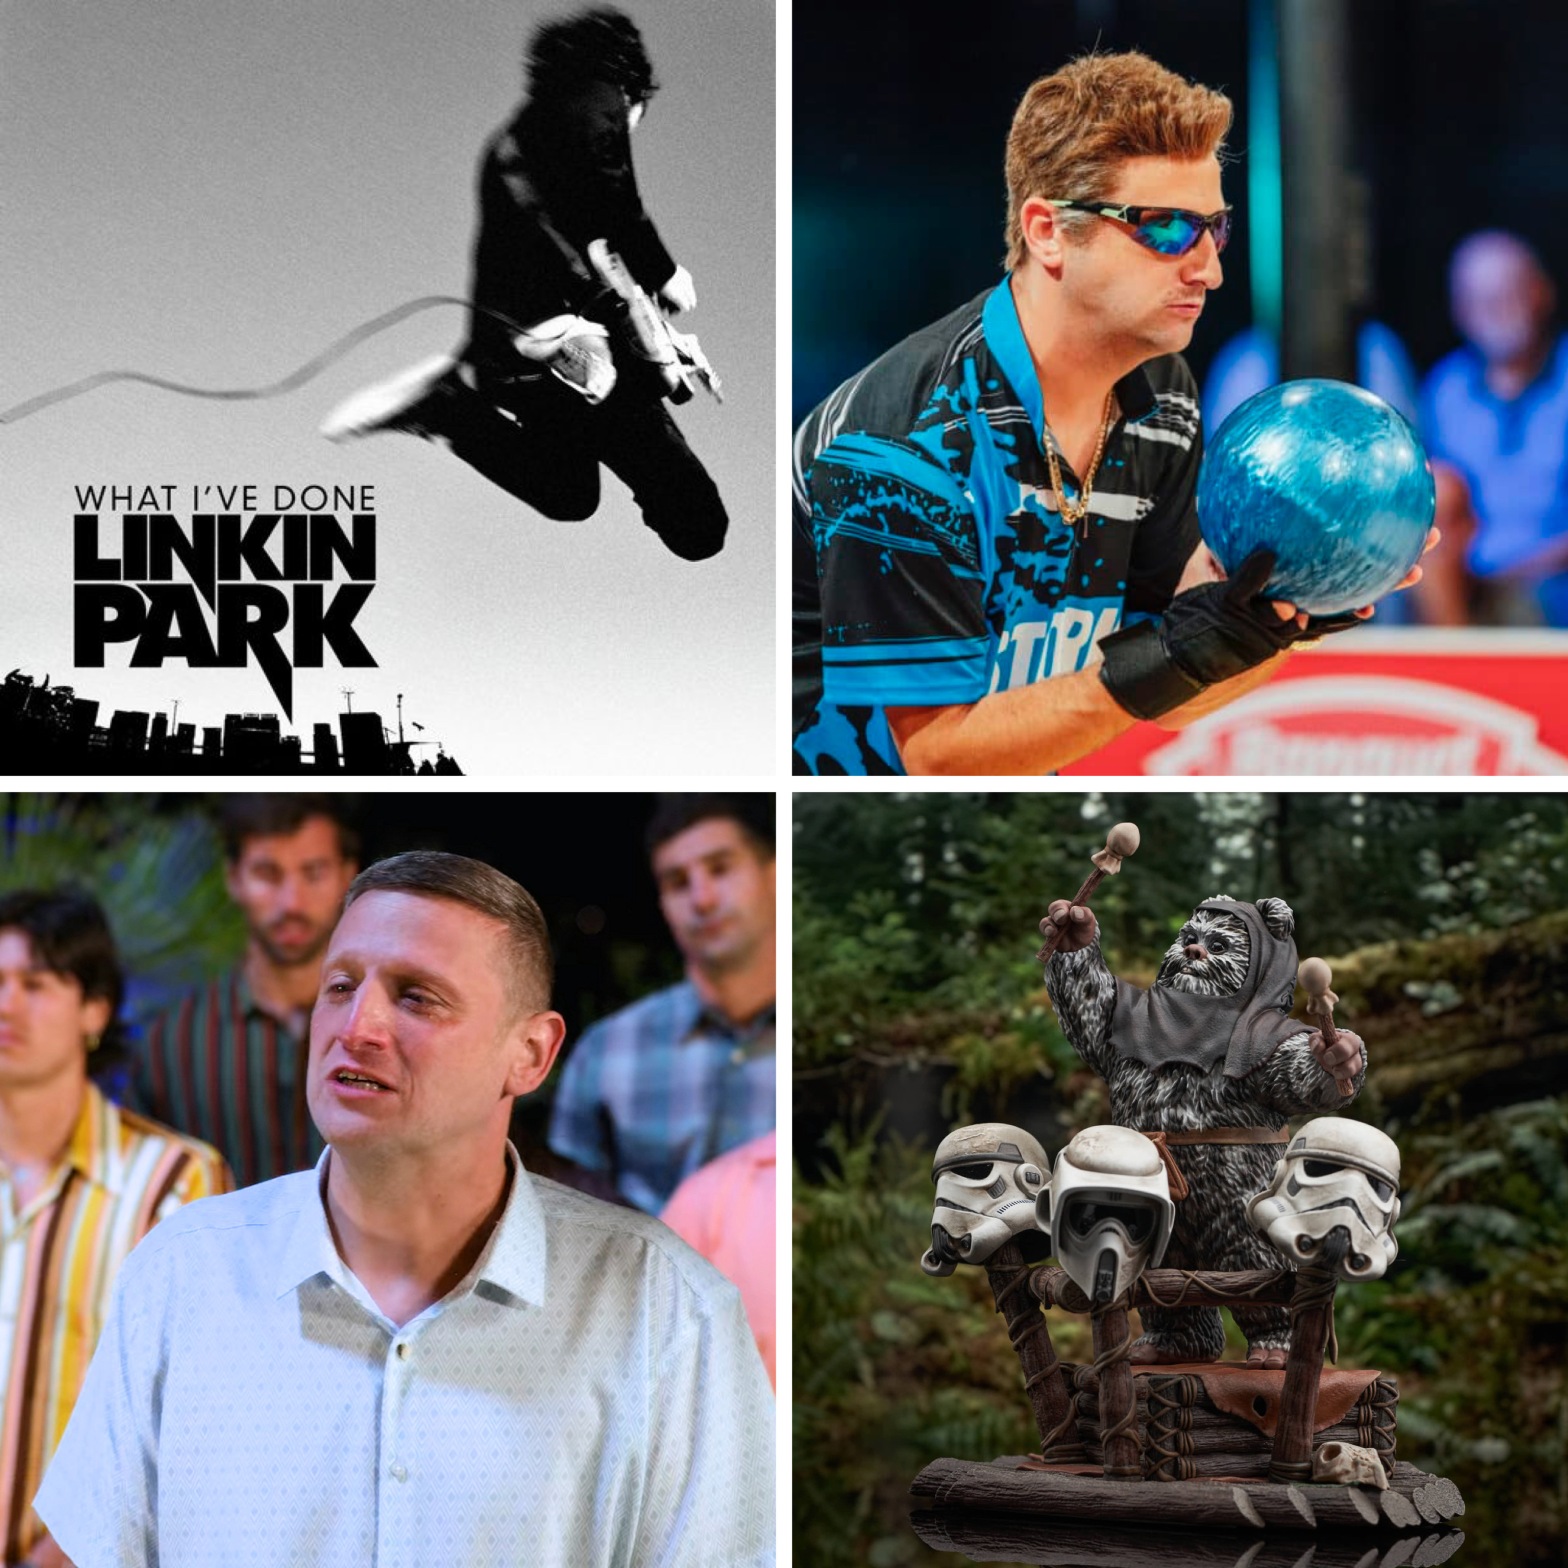 Linkin Park’s What I’ve Done, Tim Robinson bowling, Tim Robinson getting kicked off the island, and an Ewok playing helmet drums.